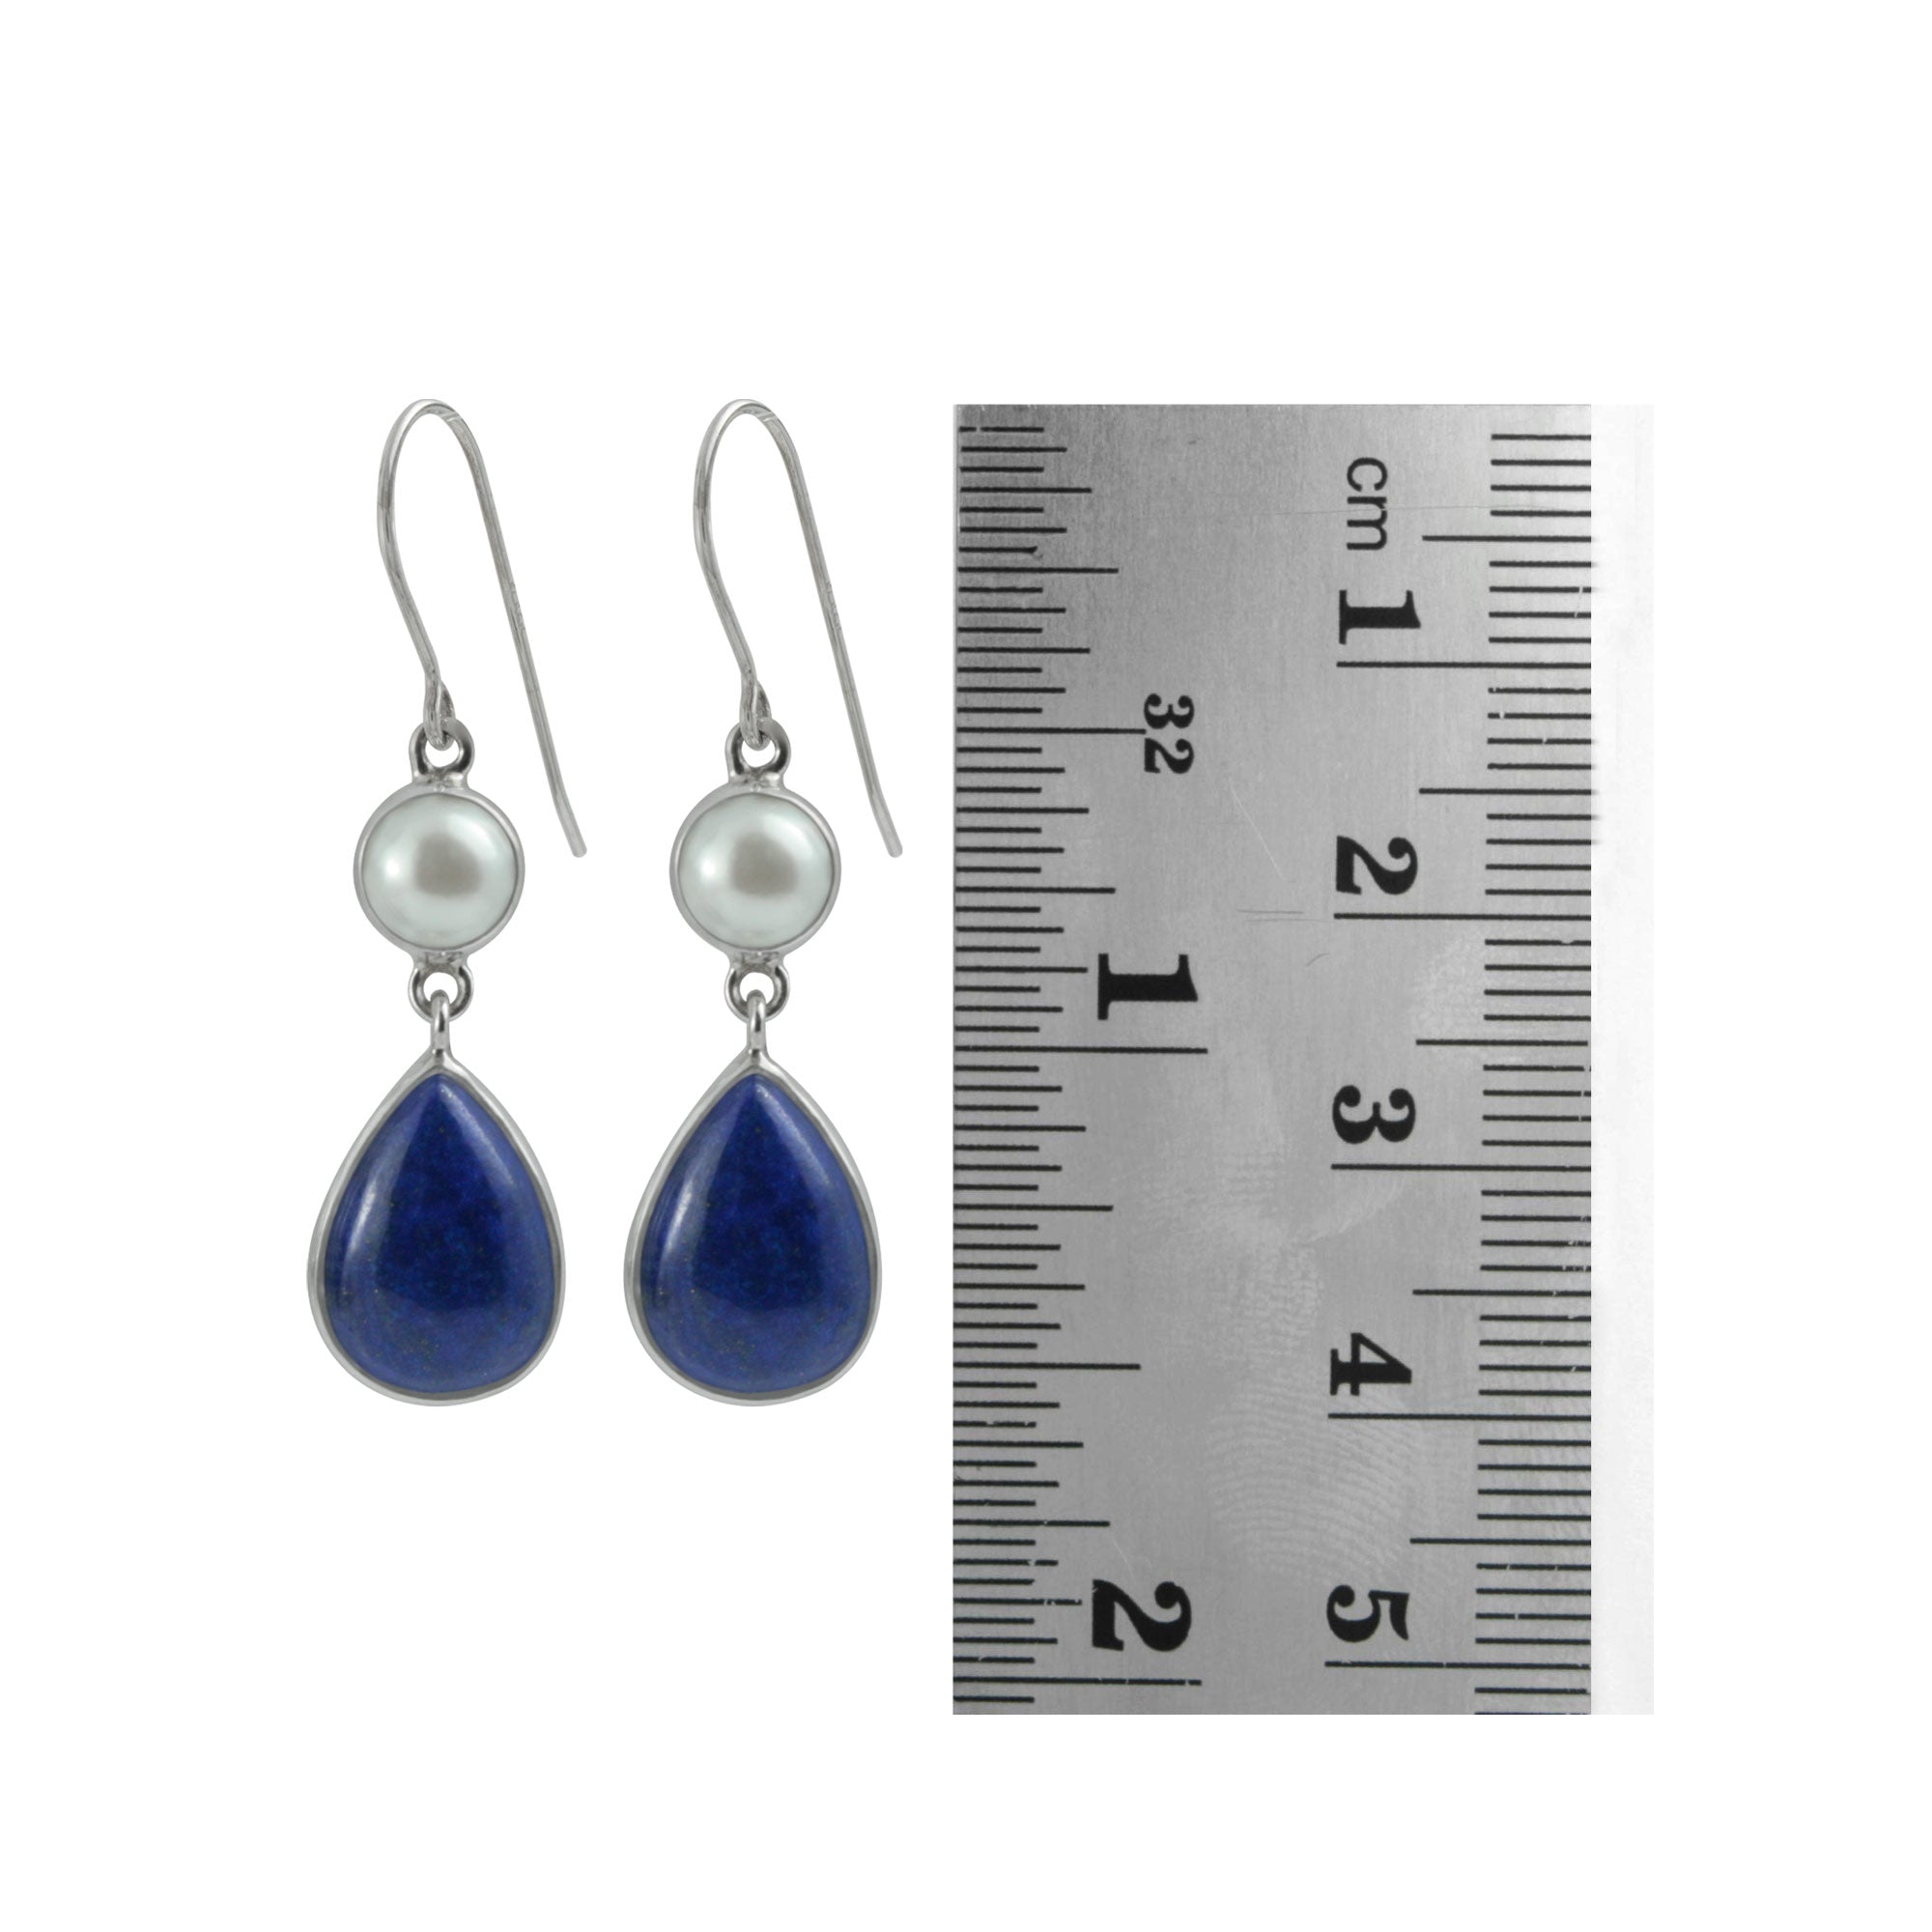 Experience  Everyday Elegance with this Pearl and Lapis Silver Earring- Great summer colors!!